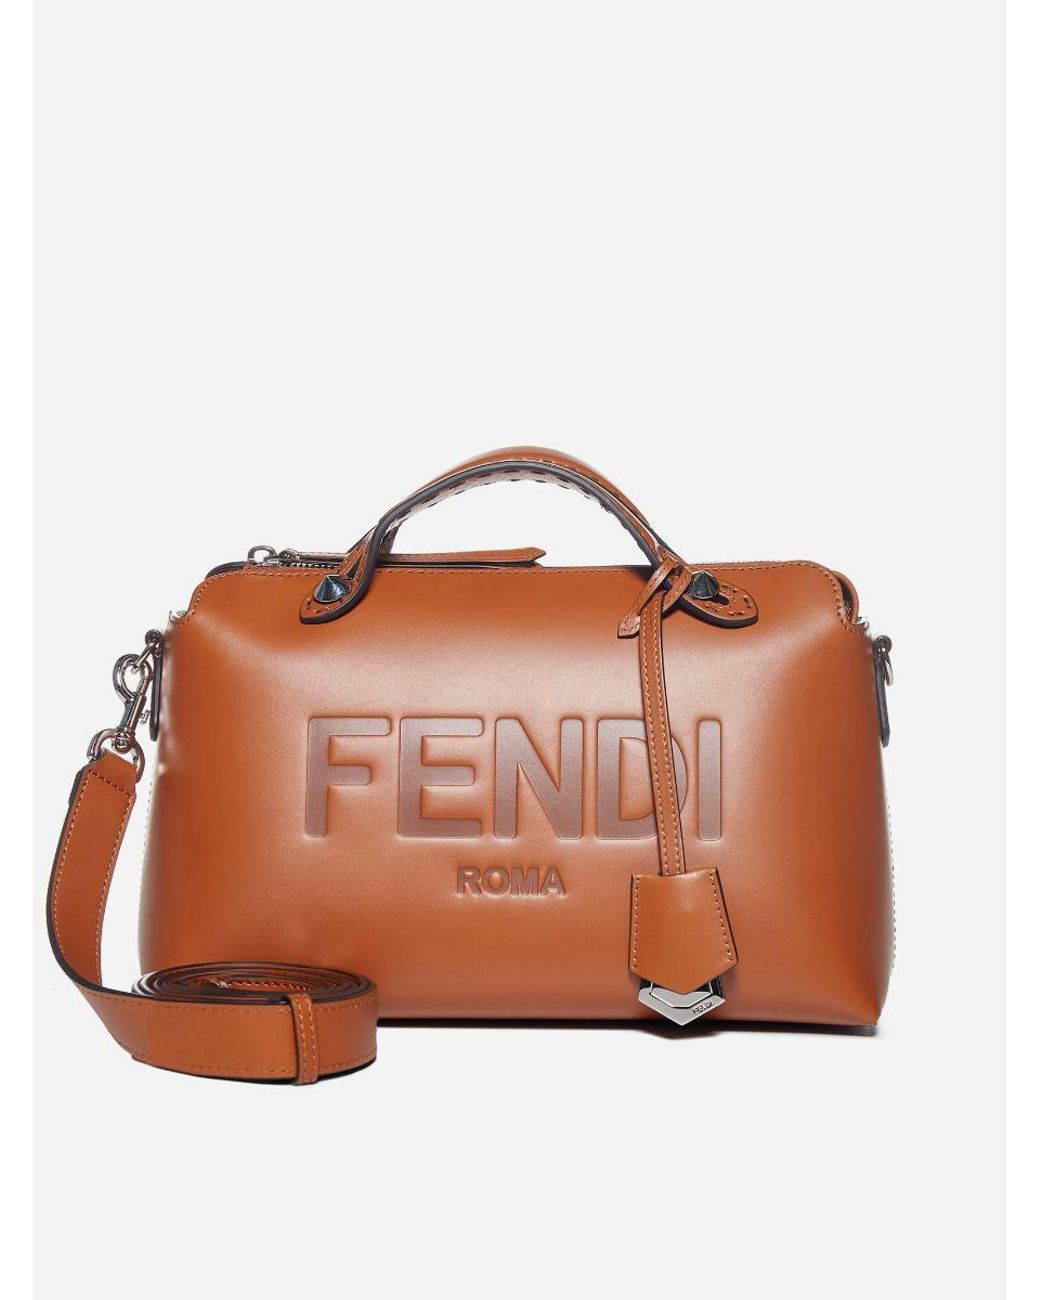 Fendi By The Way Leather Medium Bag in Brown | Lyst